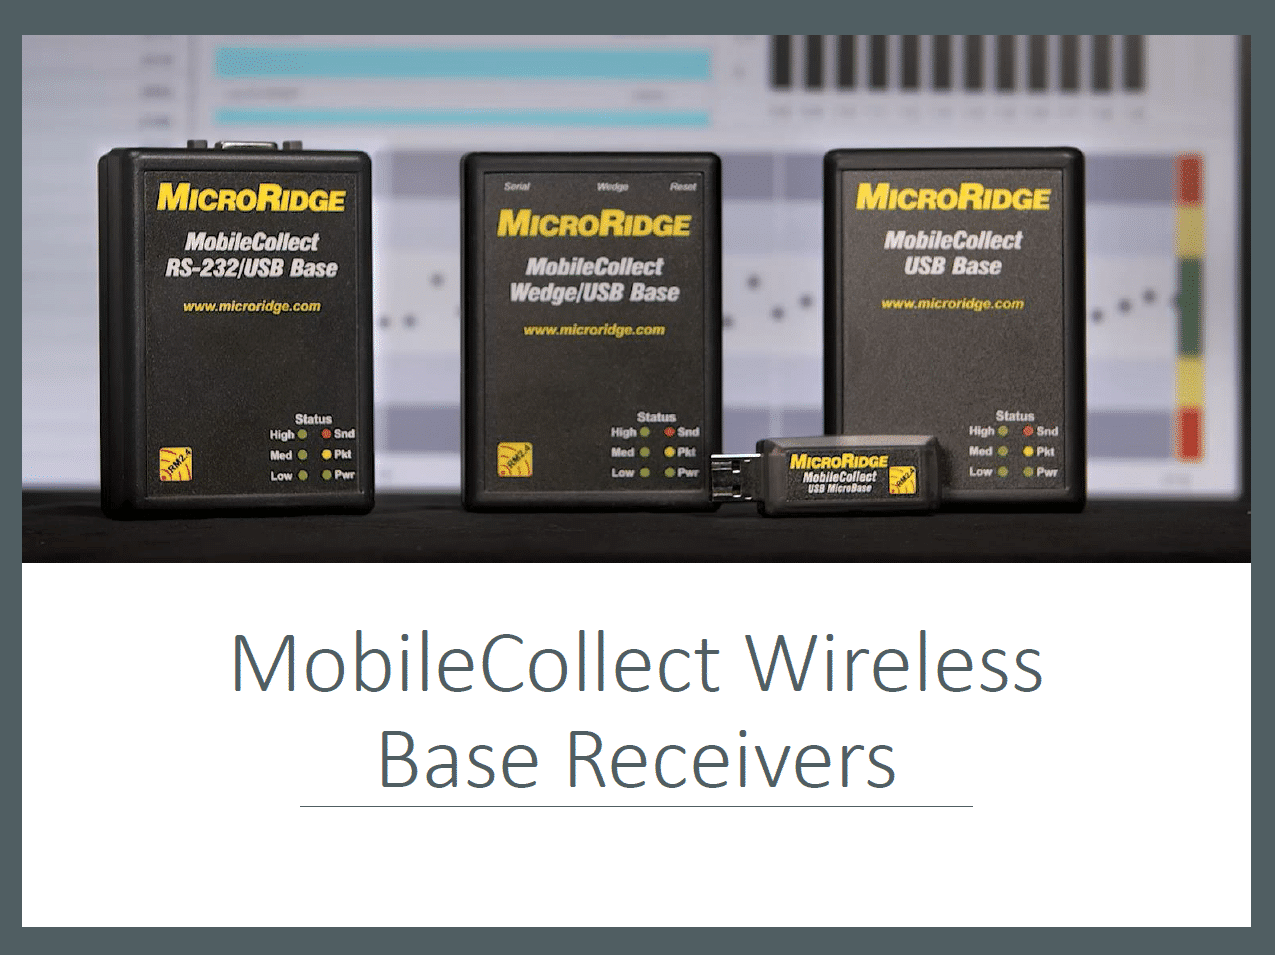 Overview: MobileCollect Wireless Base Receivers